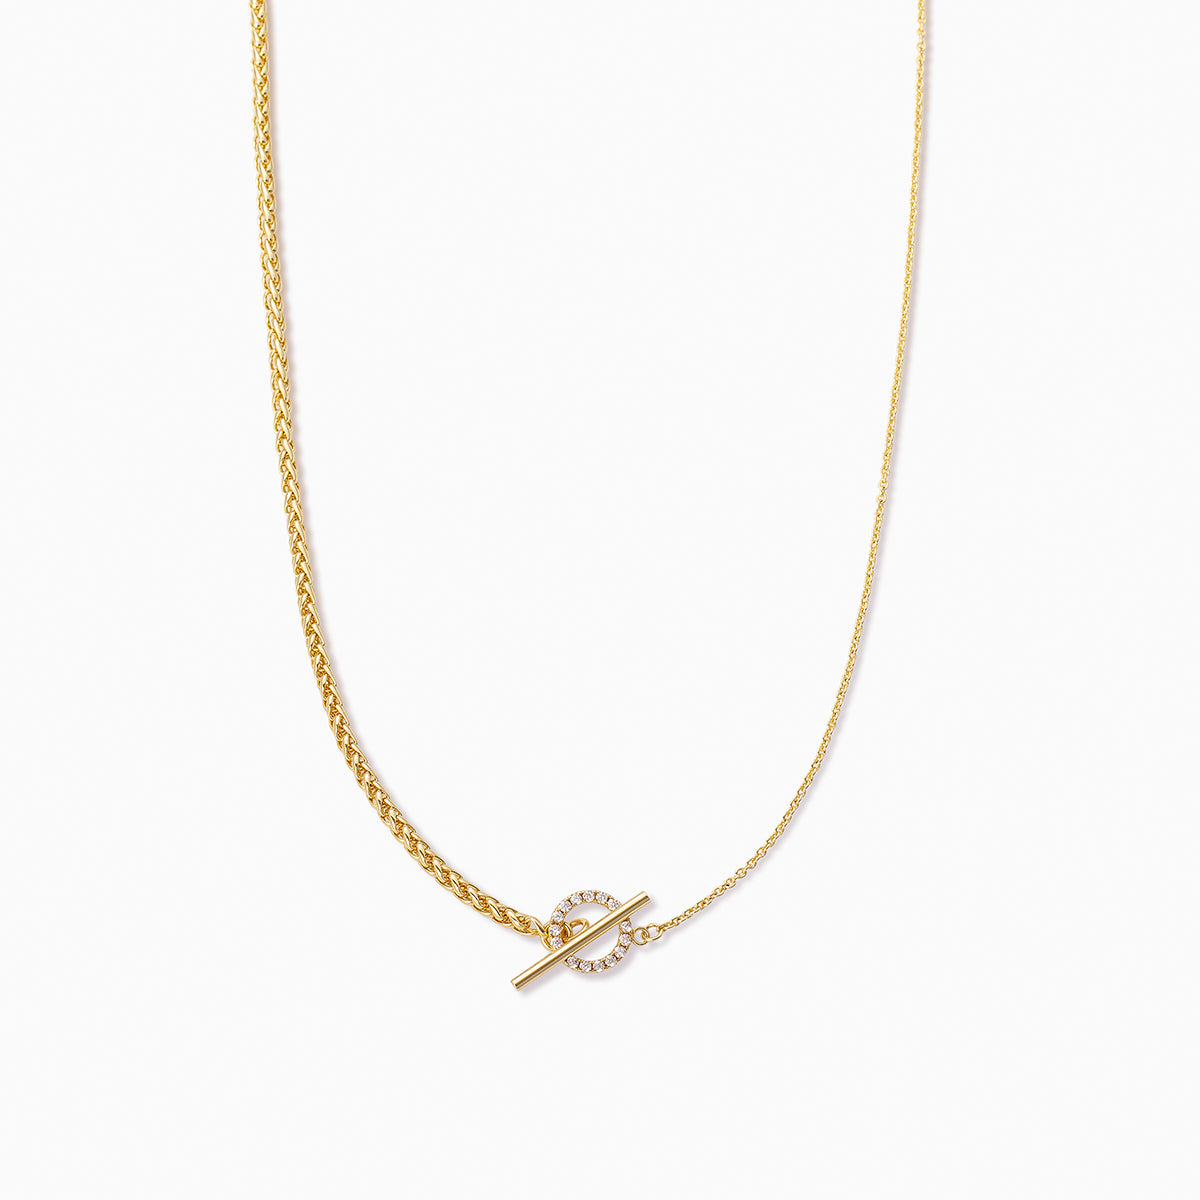 Turn It Up Chain Necklace | Gold | Product Image | Uncommon James